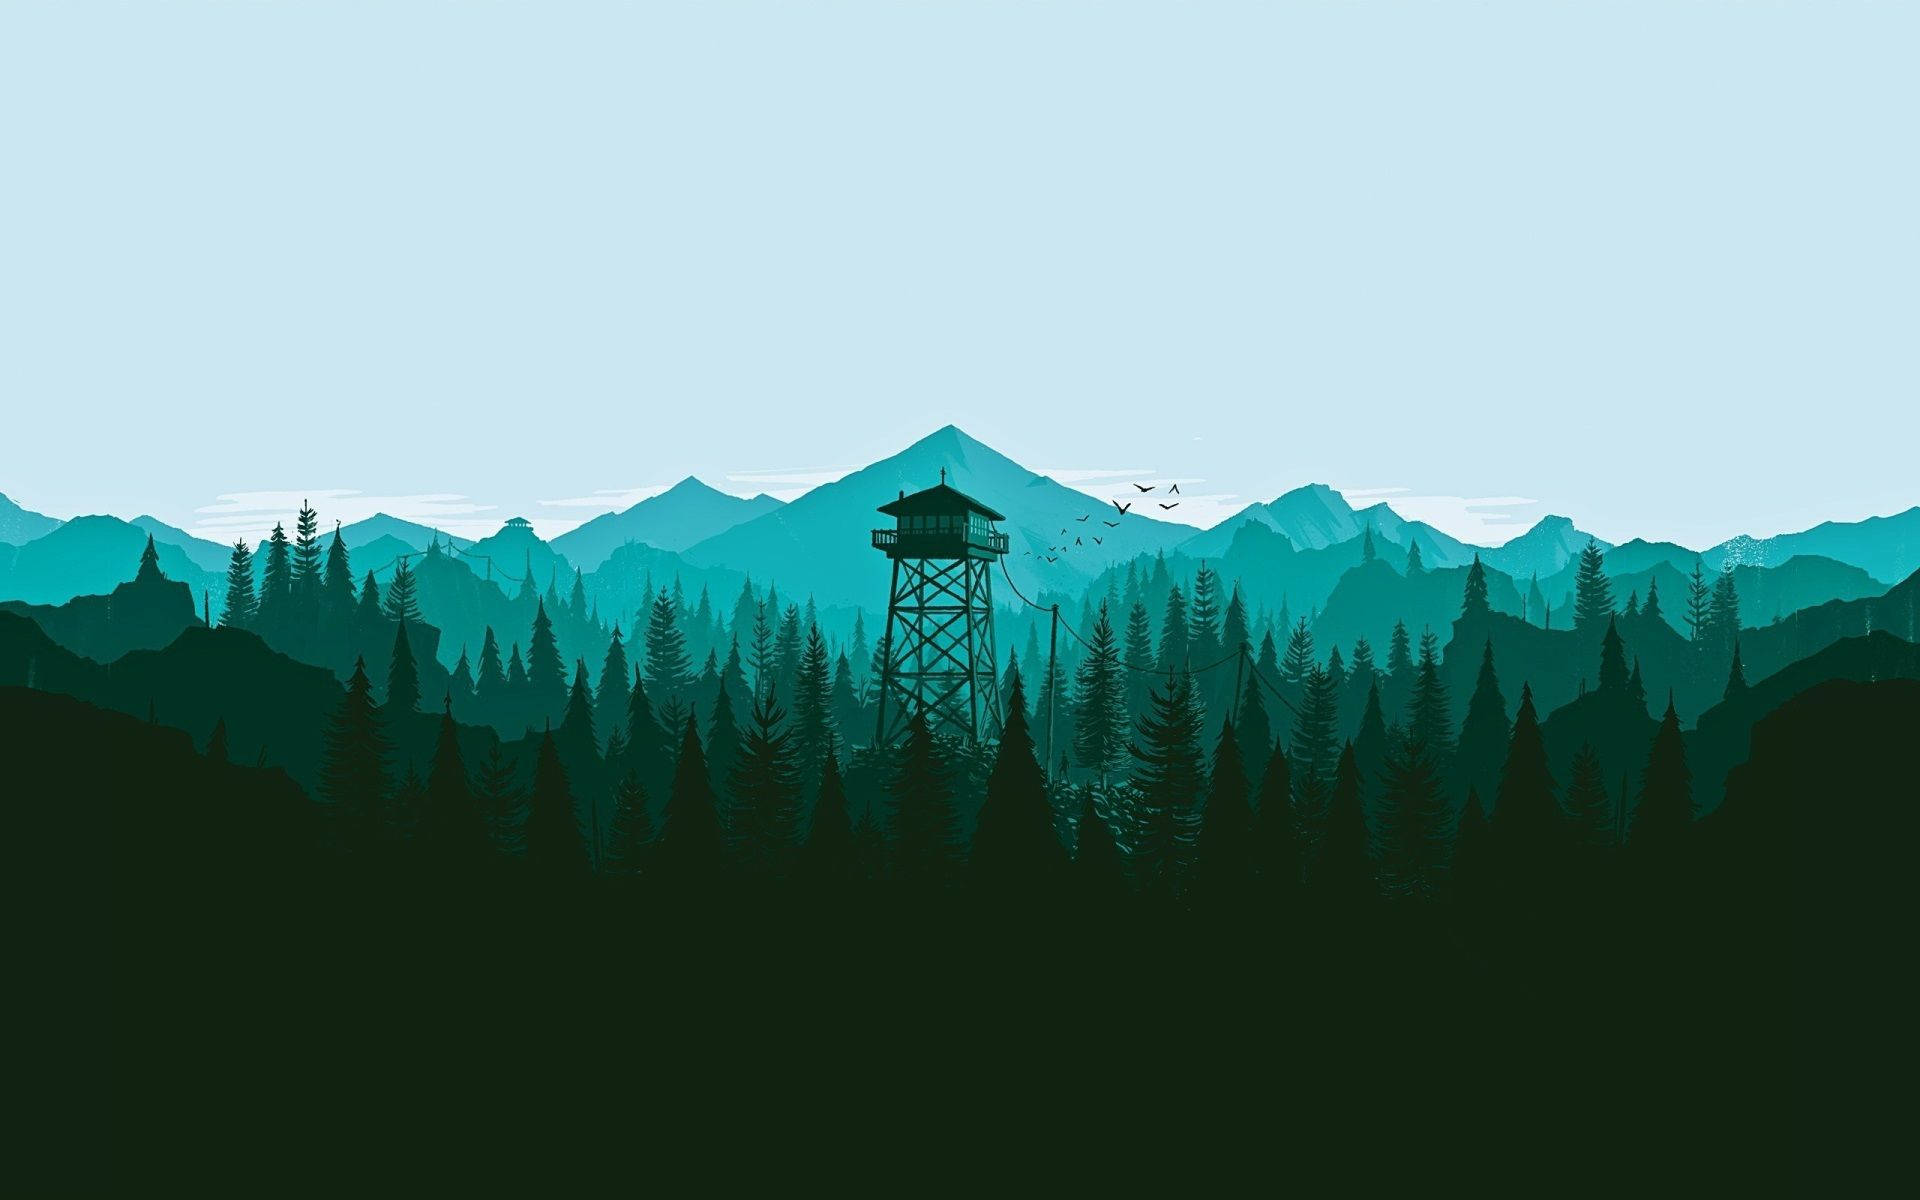 "Taking in the breathtaking sky while manning the Firewatch tower." Wallpaper